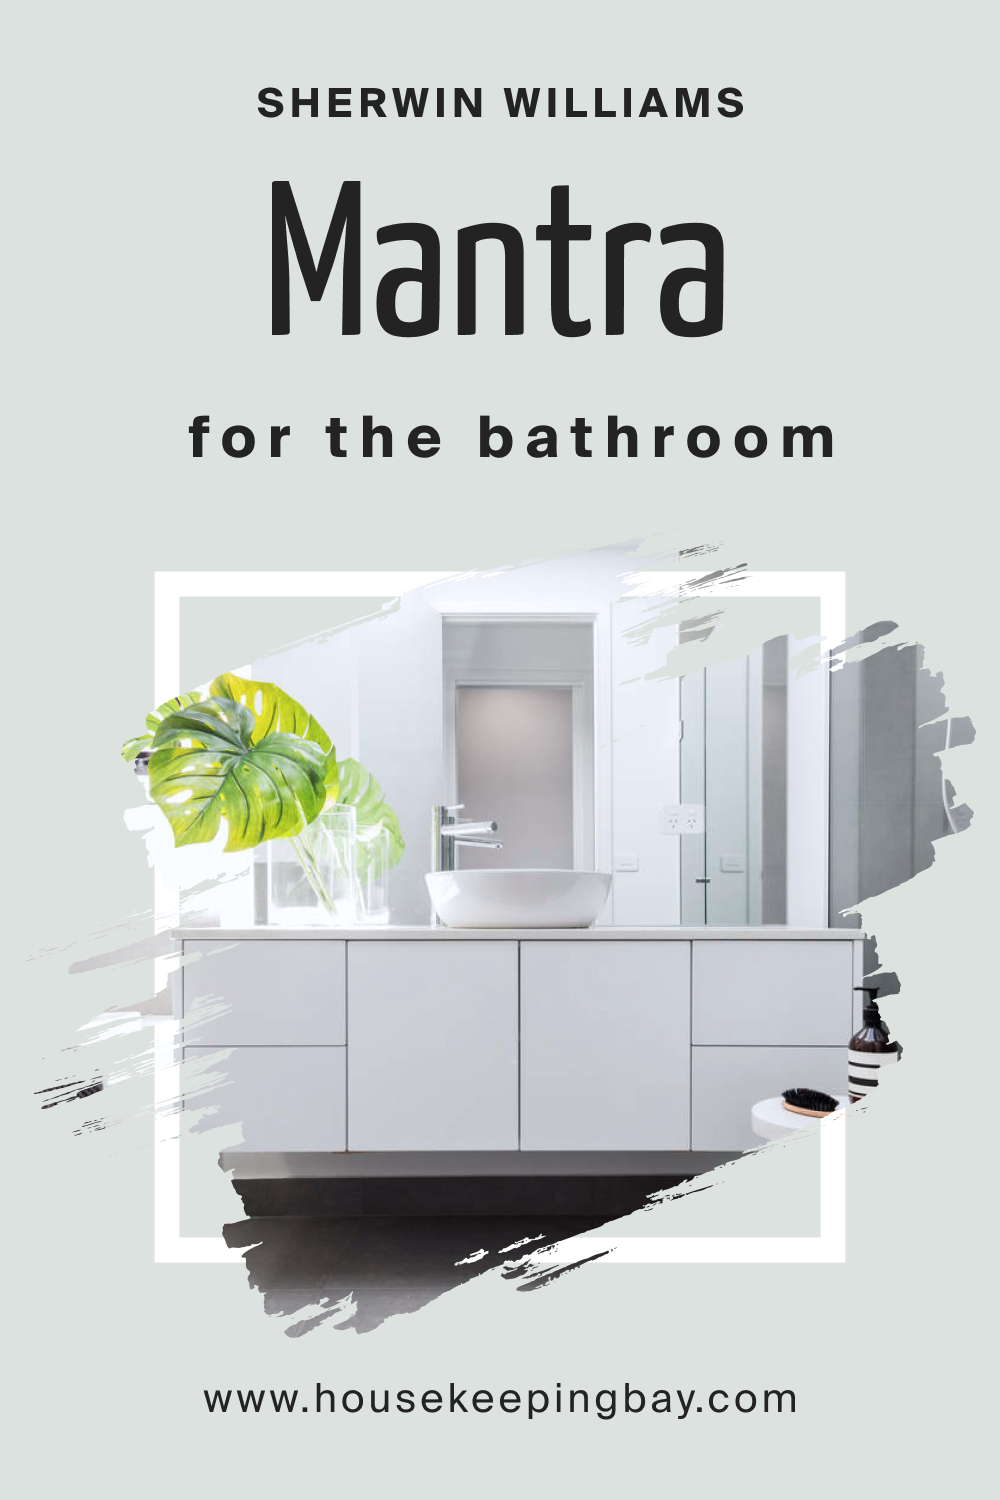 – Sherwin Williams. SW 9631 Mantra For the Bathroom